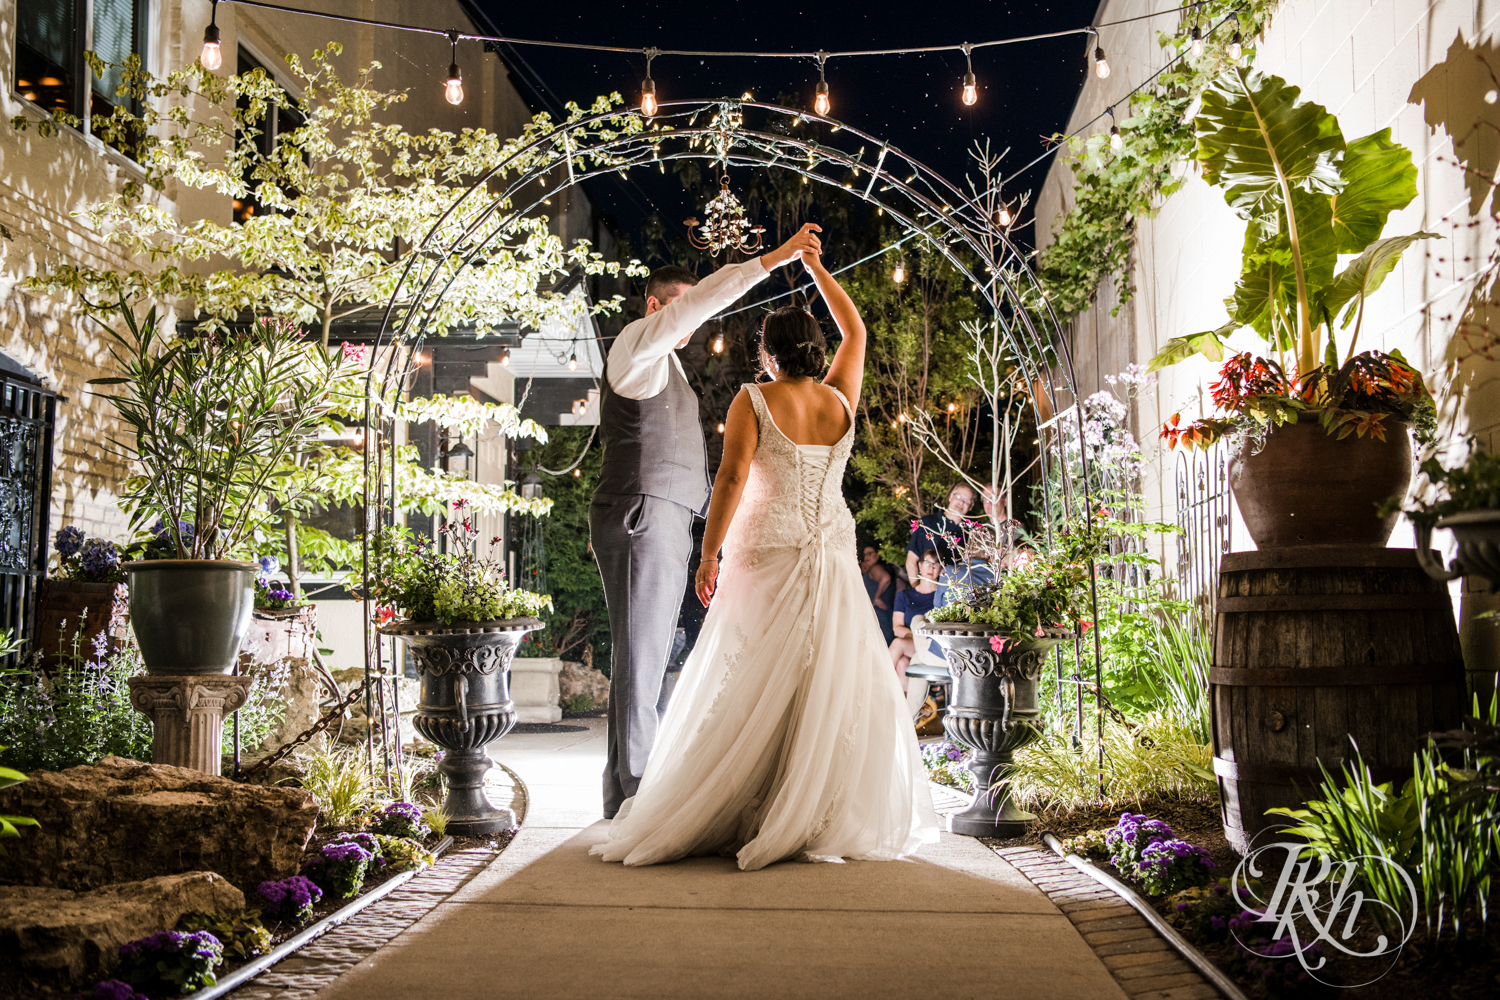 Bride and groom dance outside at night at Kellerman's Event Center in White Bear Lake, Minnesota.